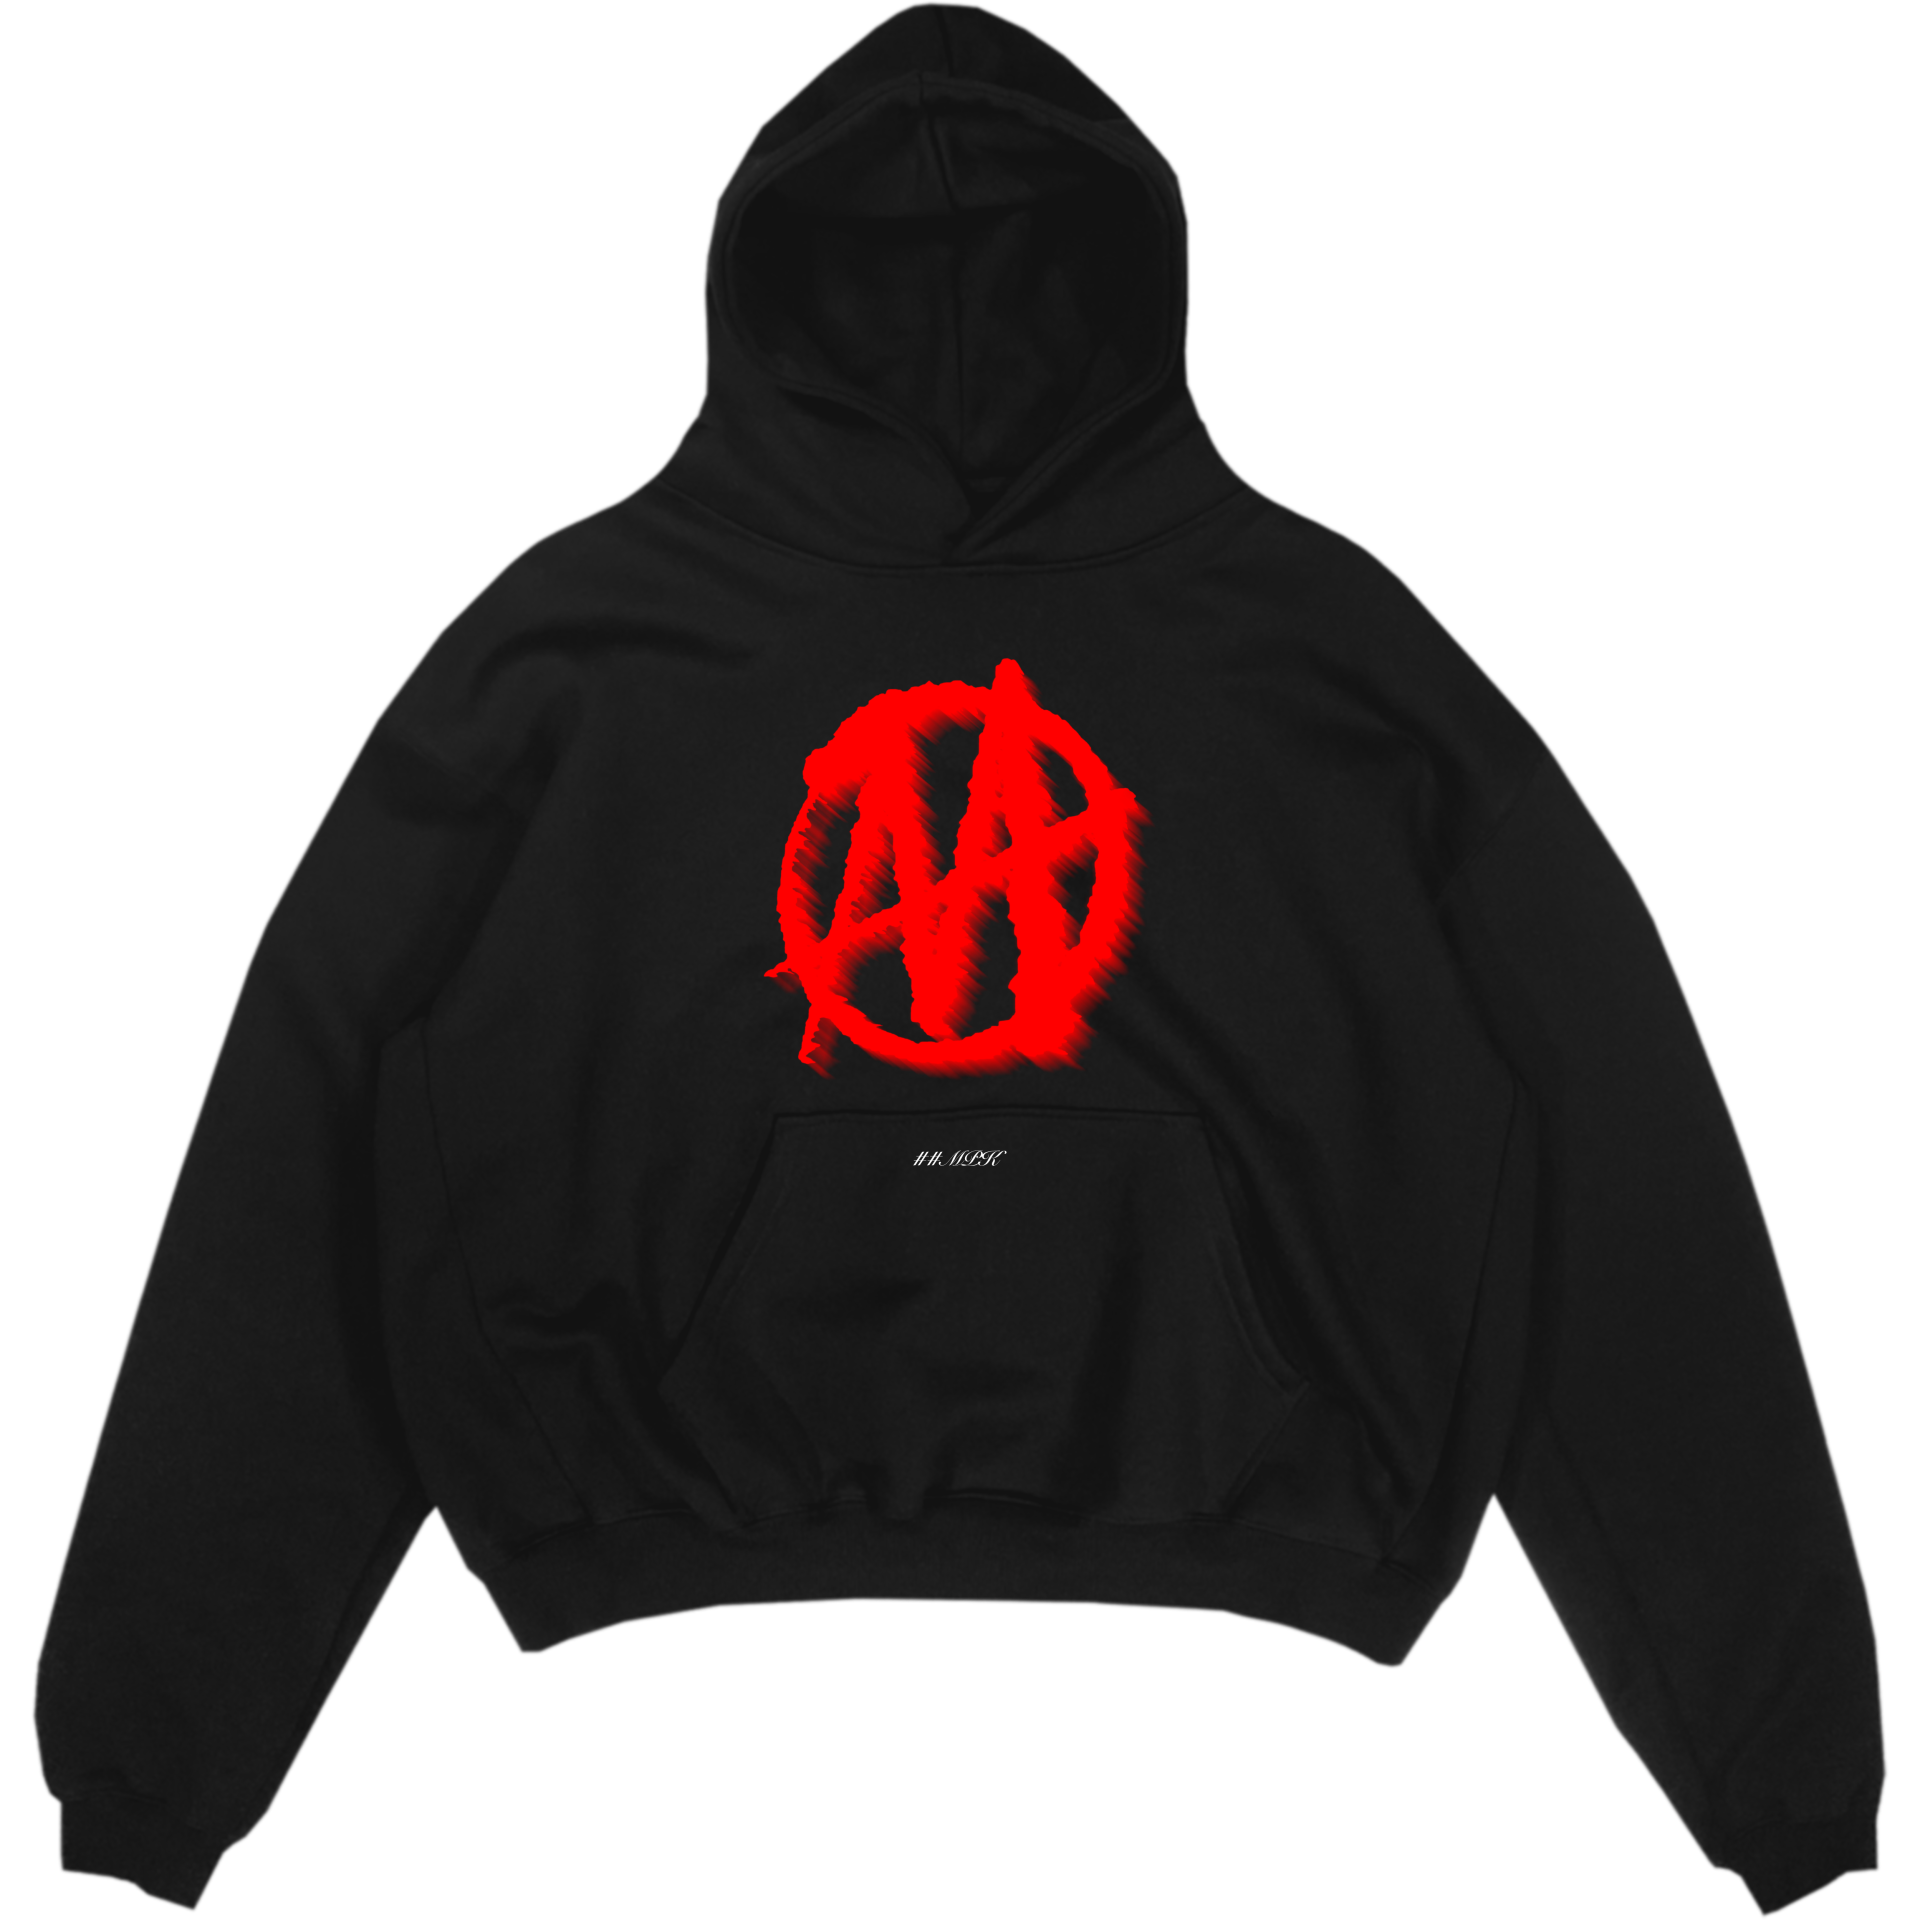 black hoodie with double A in red logo